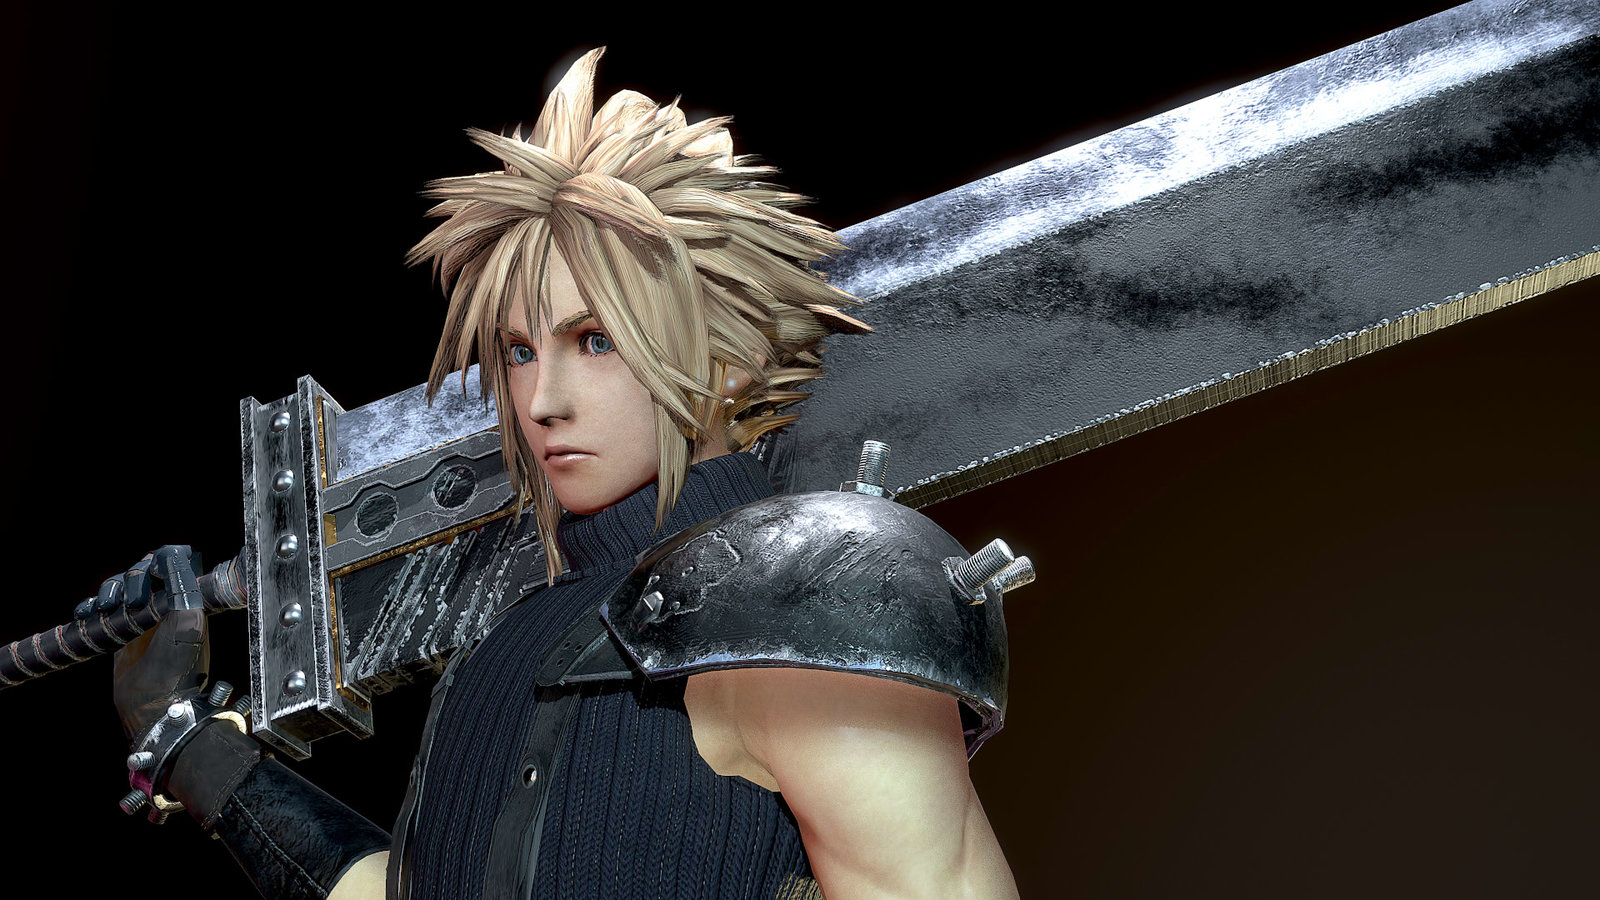 Cloud Strife from FINAL FANTASY 7.